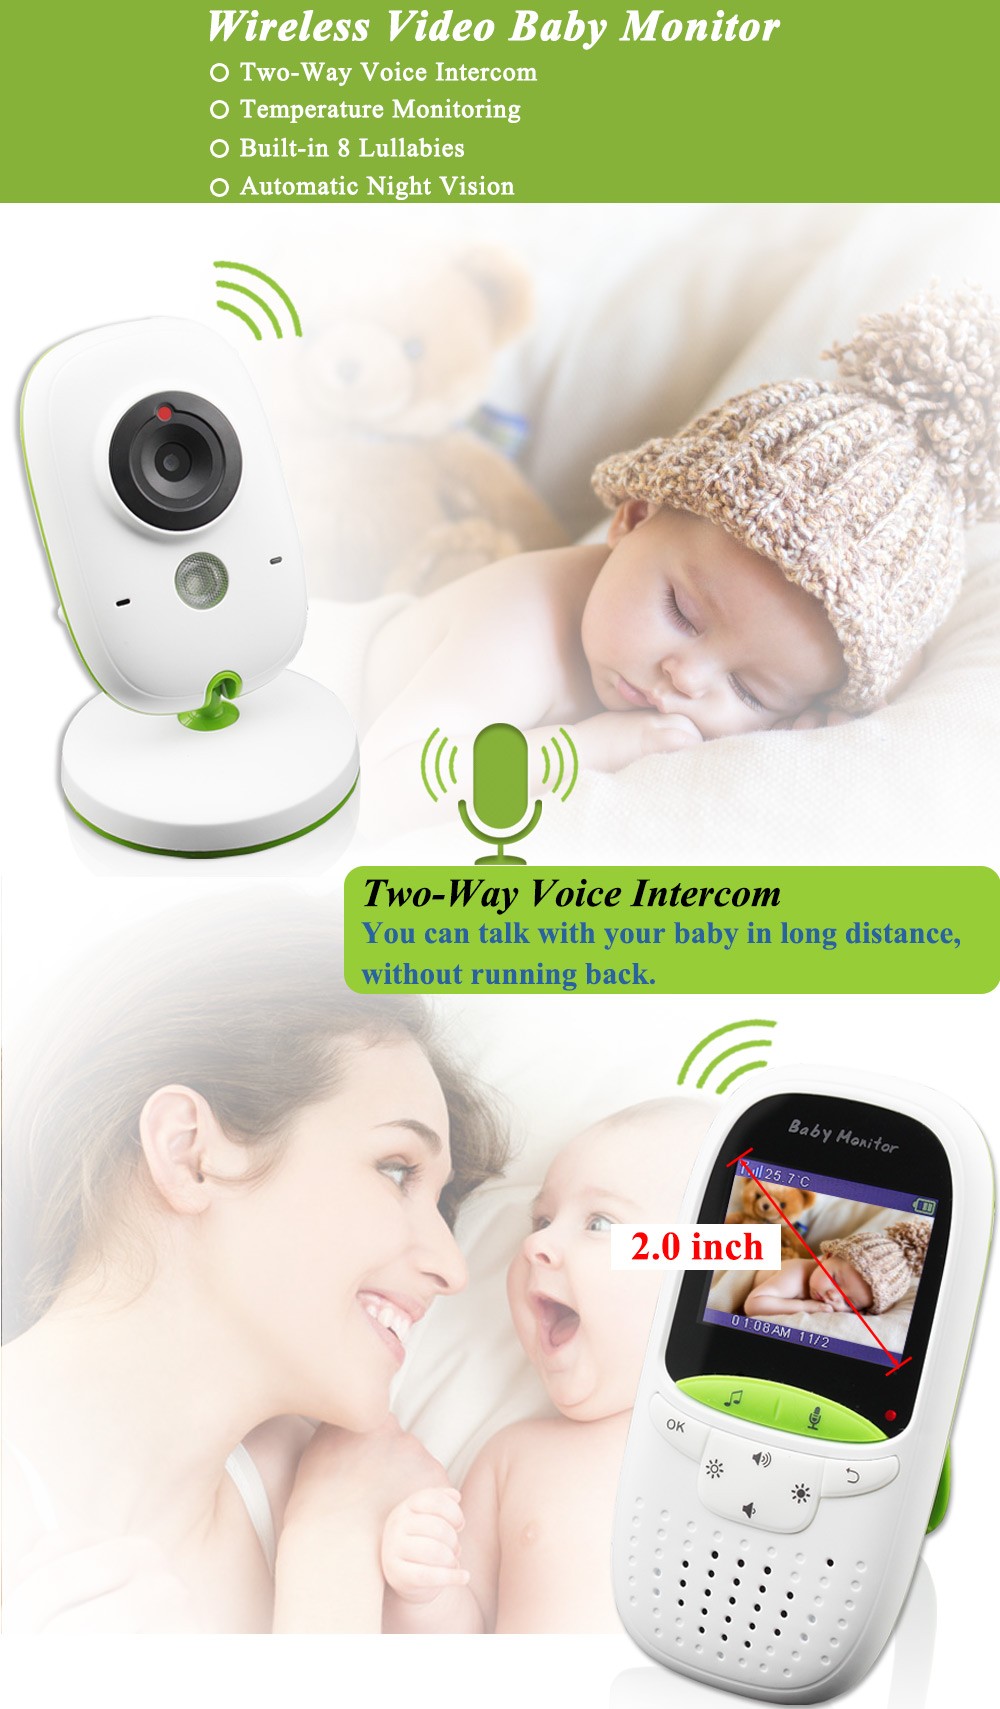 Vvcare VB602 2.4G Wireless Baby Monitor 2 Inch Electronic Babysitter Nanny Security Camera Two-way Audio Night Vision Temperature Monitoring